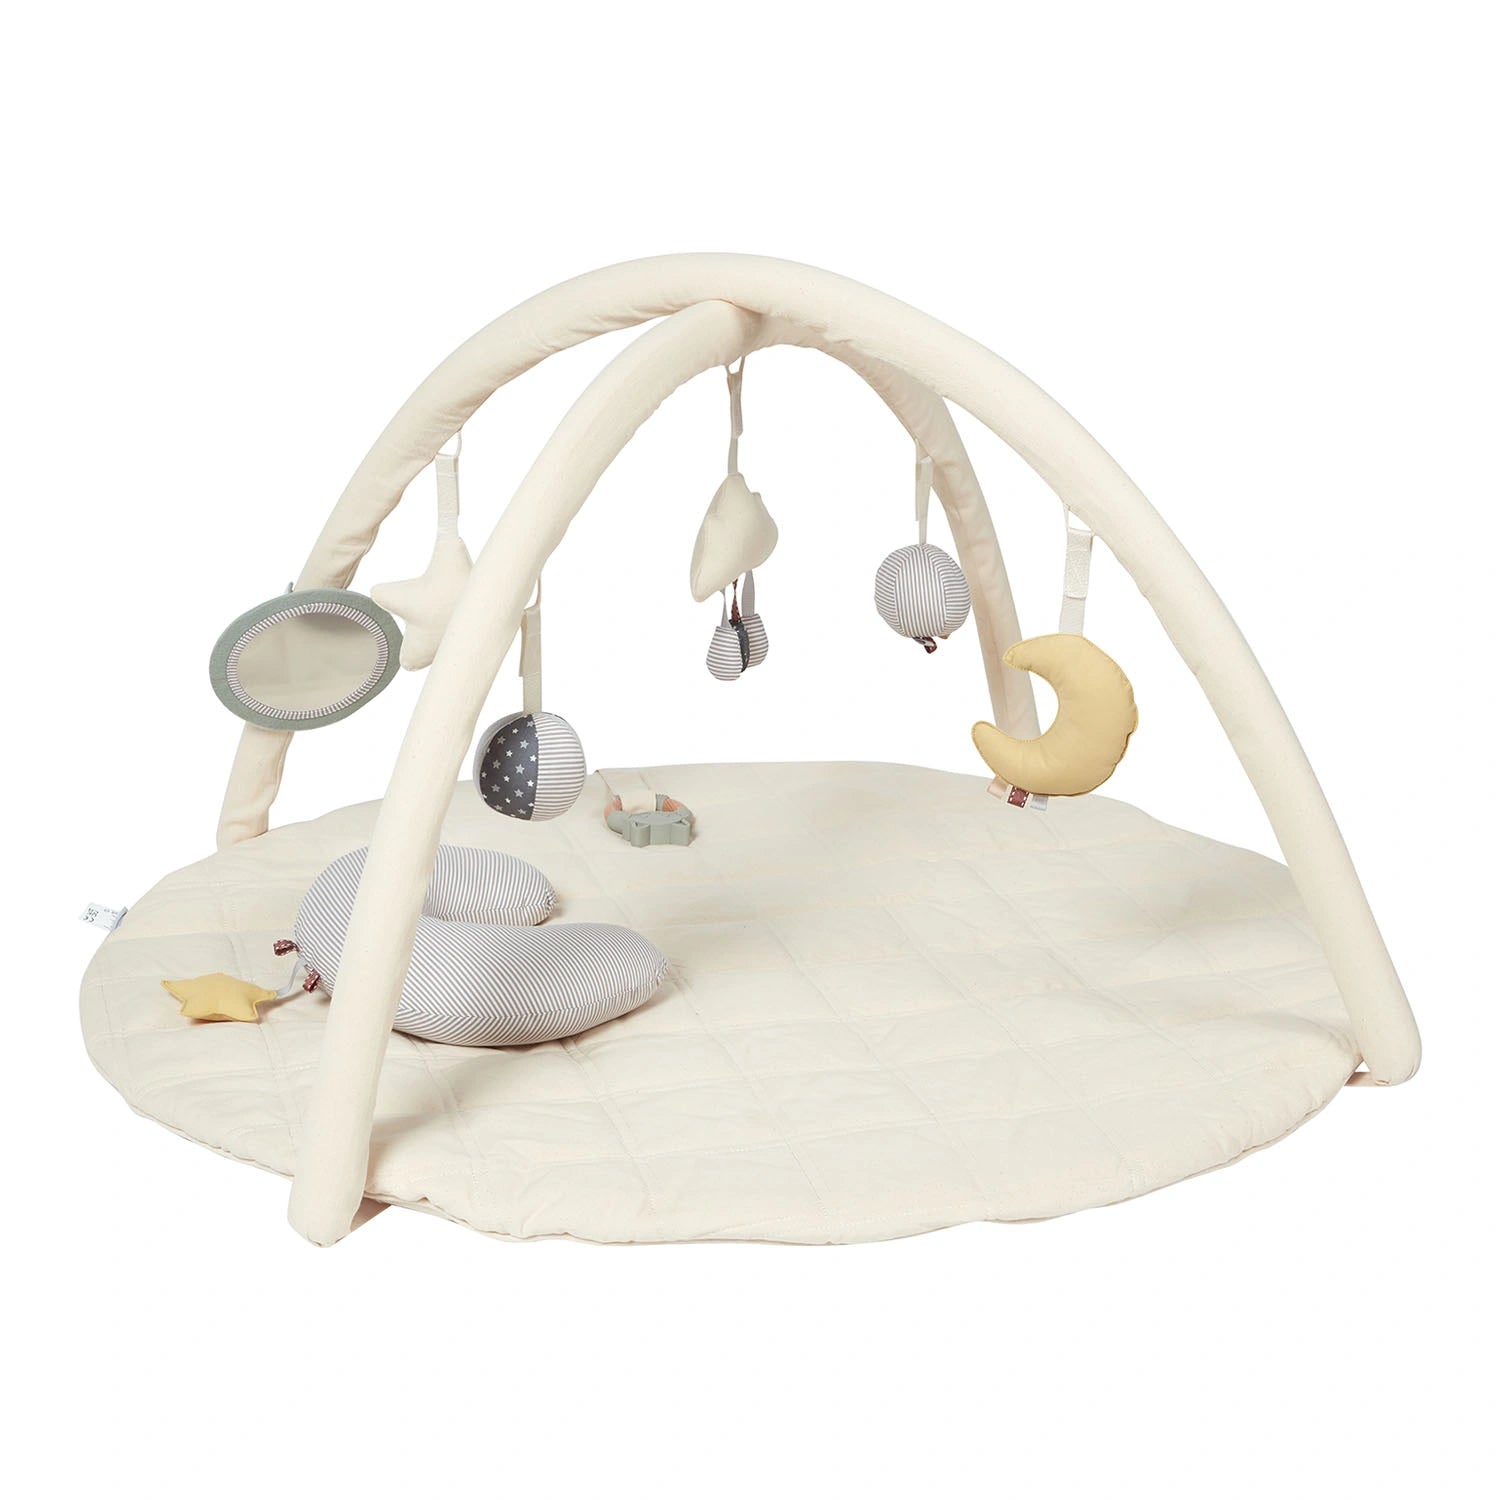 An image of Award-Winning 5-in-1 Organic Baby Play Mat with Toys